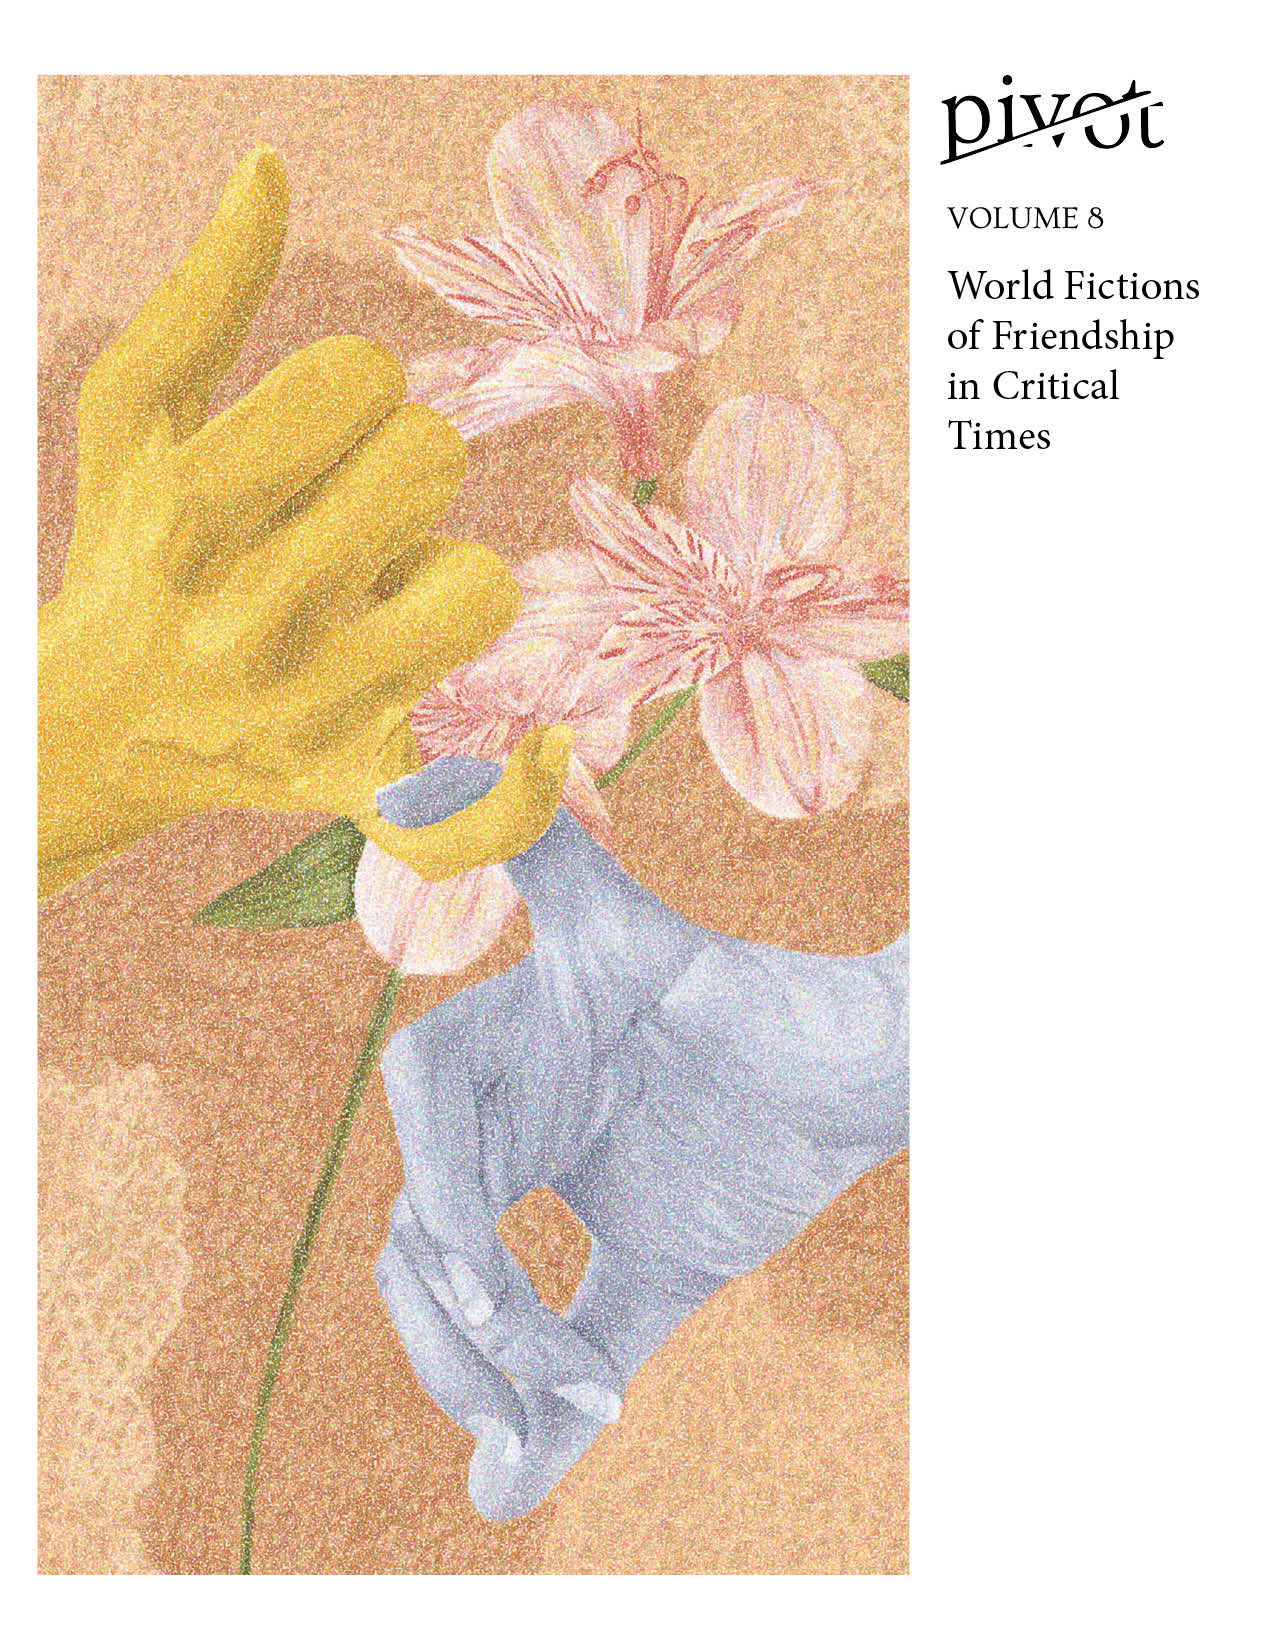 Two hands come together to form a pink promise. The hand one the left is yellow, while the right is blue. They lay over an earthy backdrop with flowers. The cover reads "Pivot Volume 8 World Fictions of Friendship in Critical Times"